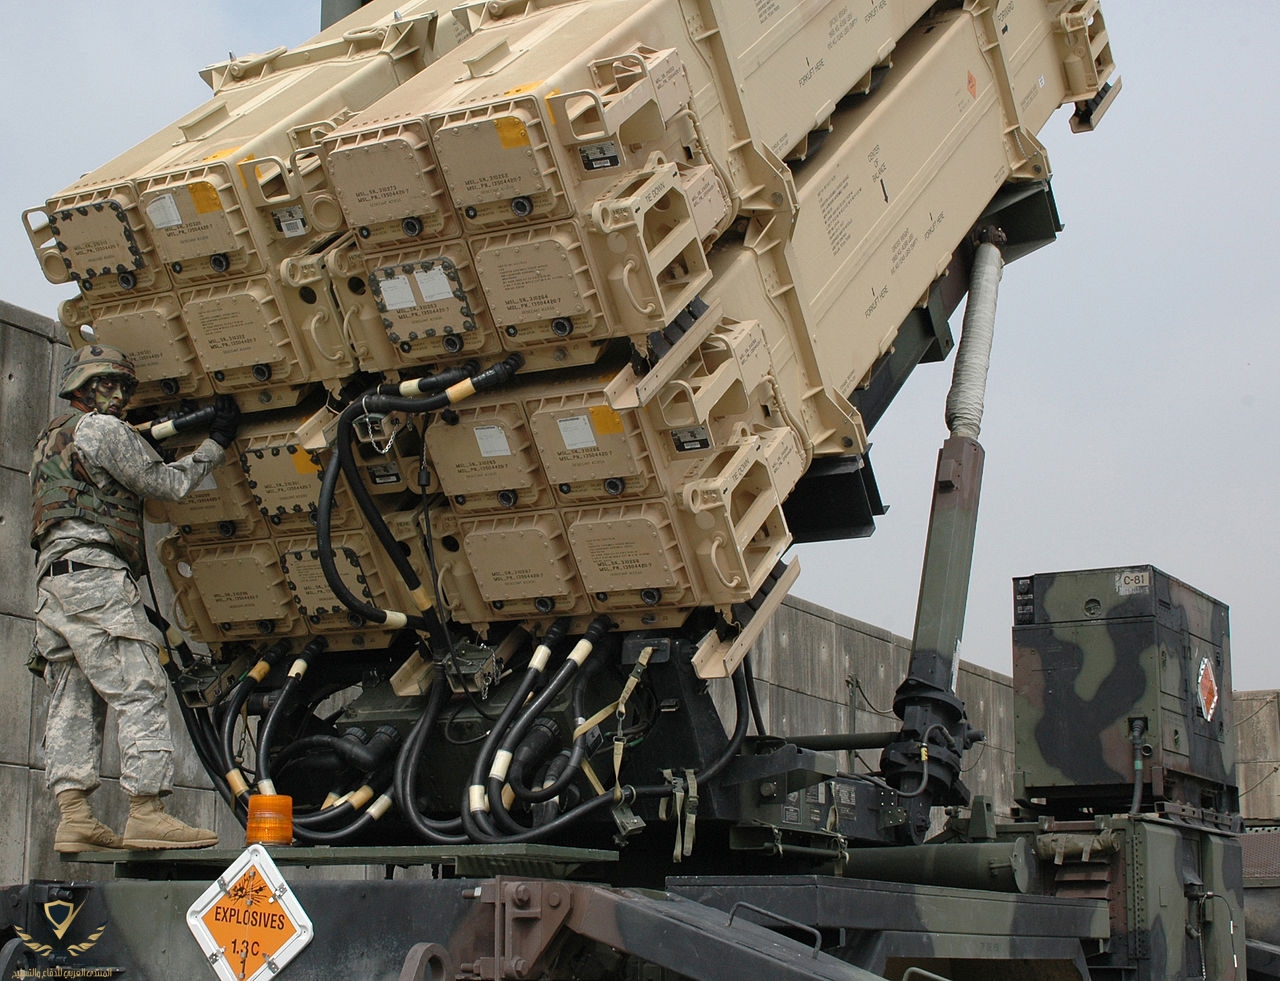 1280px-Maintenance_check_on_a_Patriot_missile.jpg